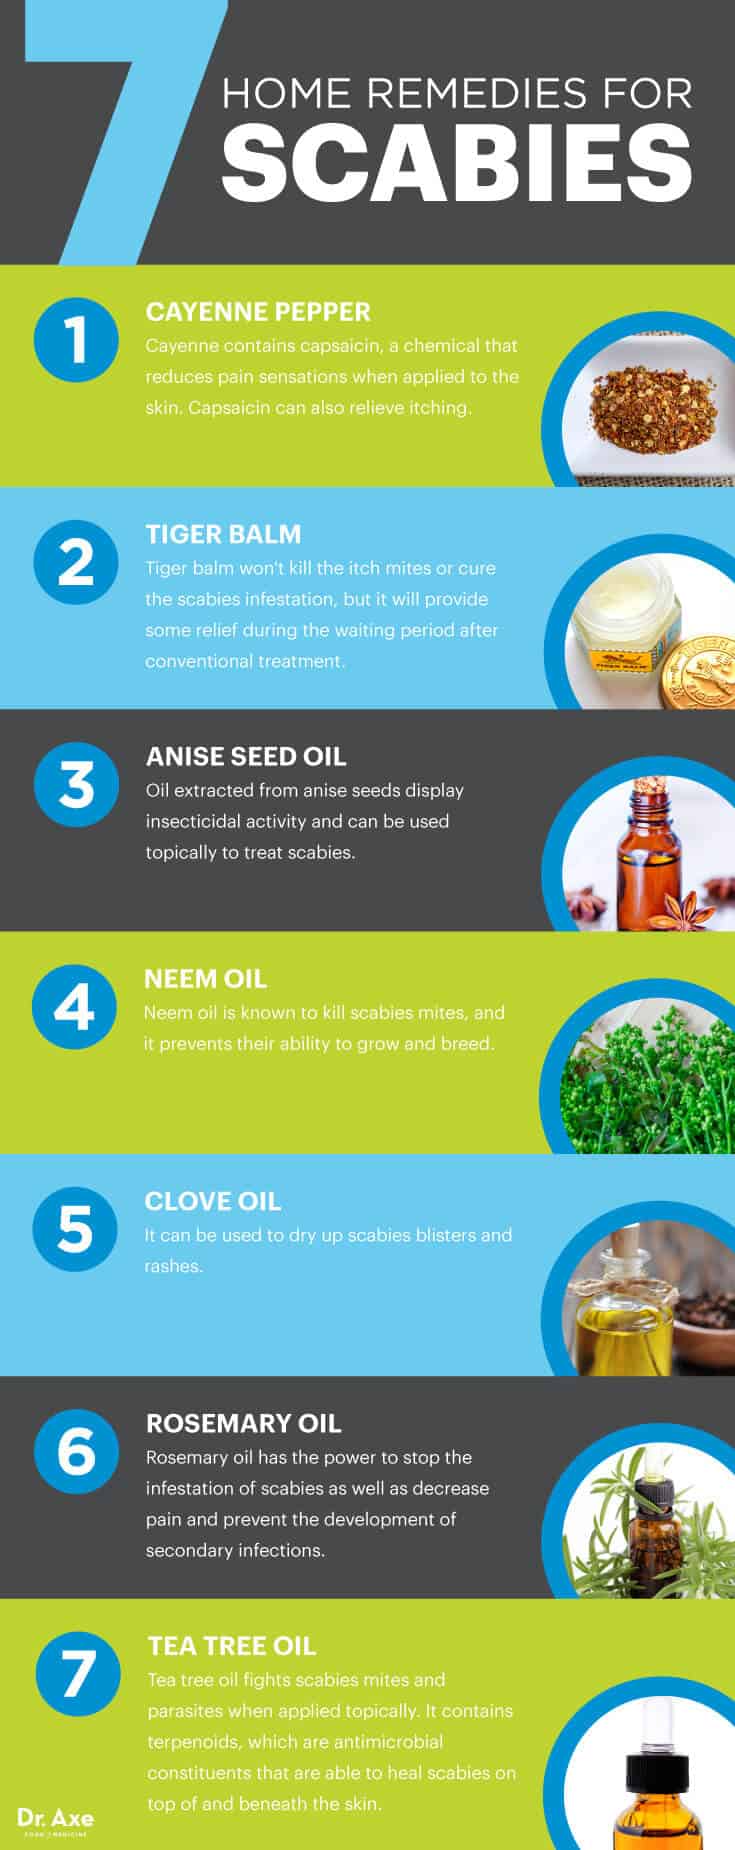 Home remedies for scabies - Dr. Axe